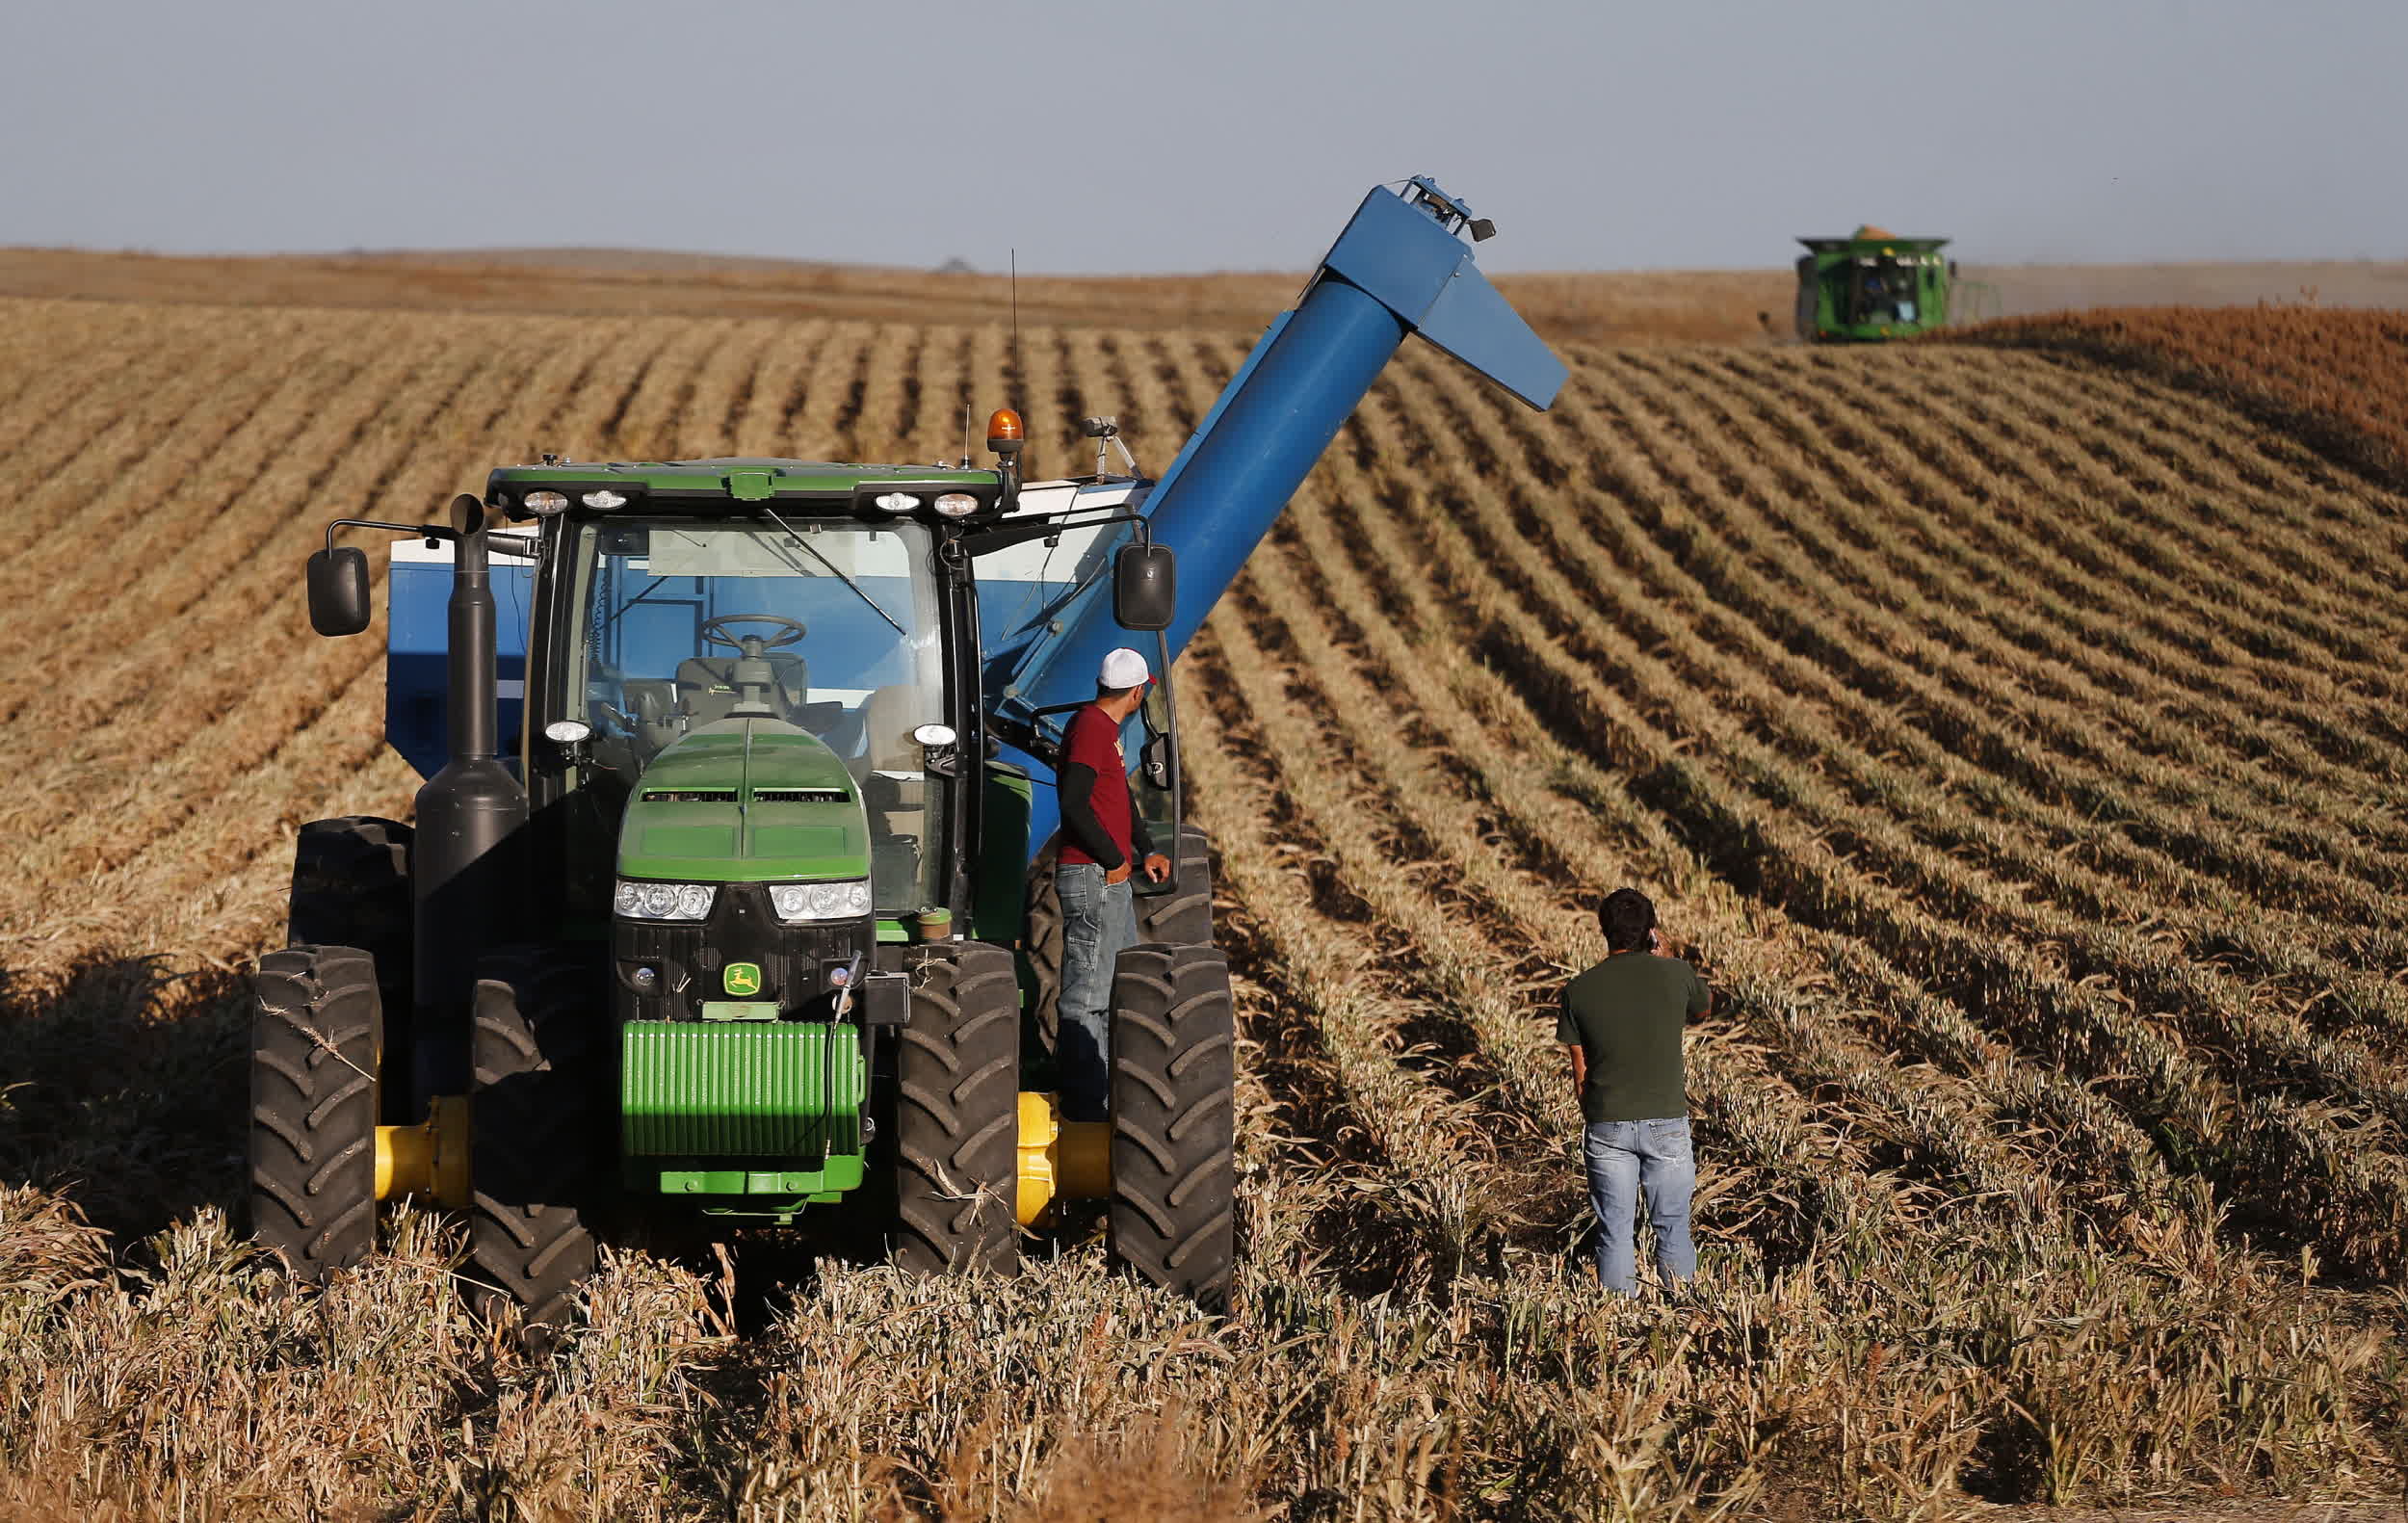 Colorado is the first US state to pass a right-to-repair law for farmers